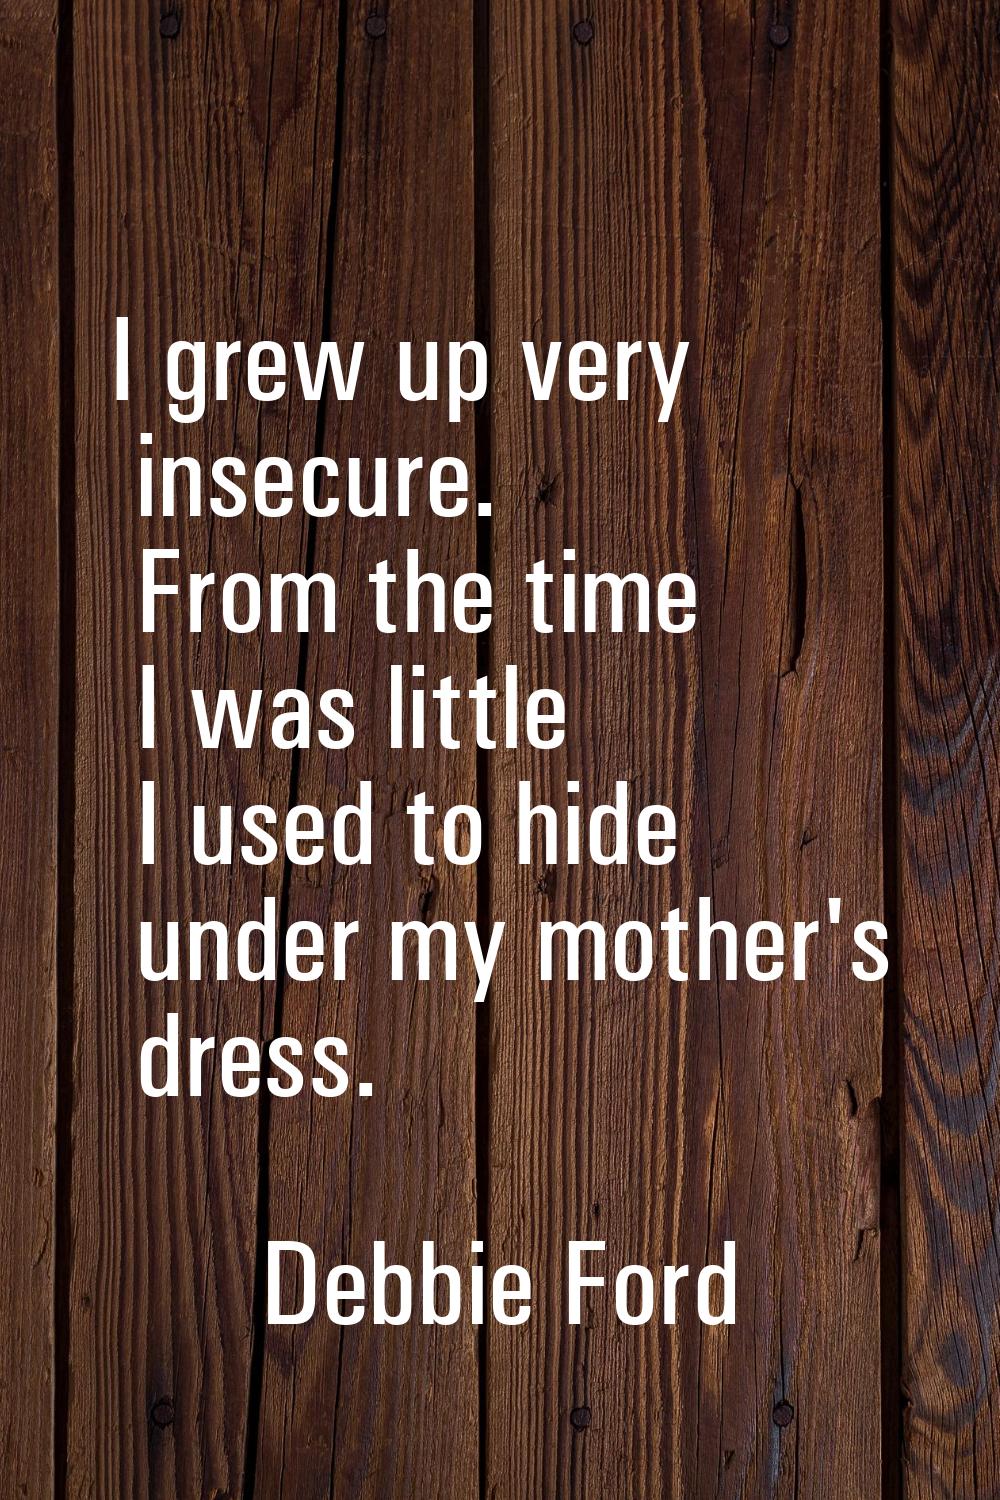 I grew up very insecure. From the time I was little I used to hide under my mother's dress.